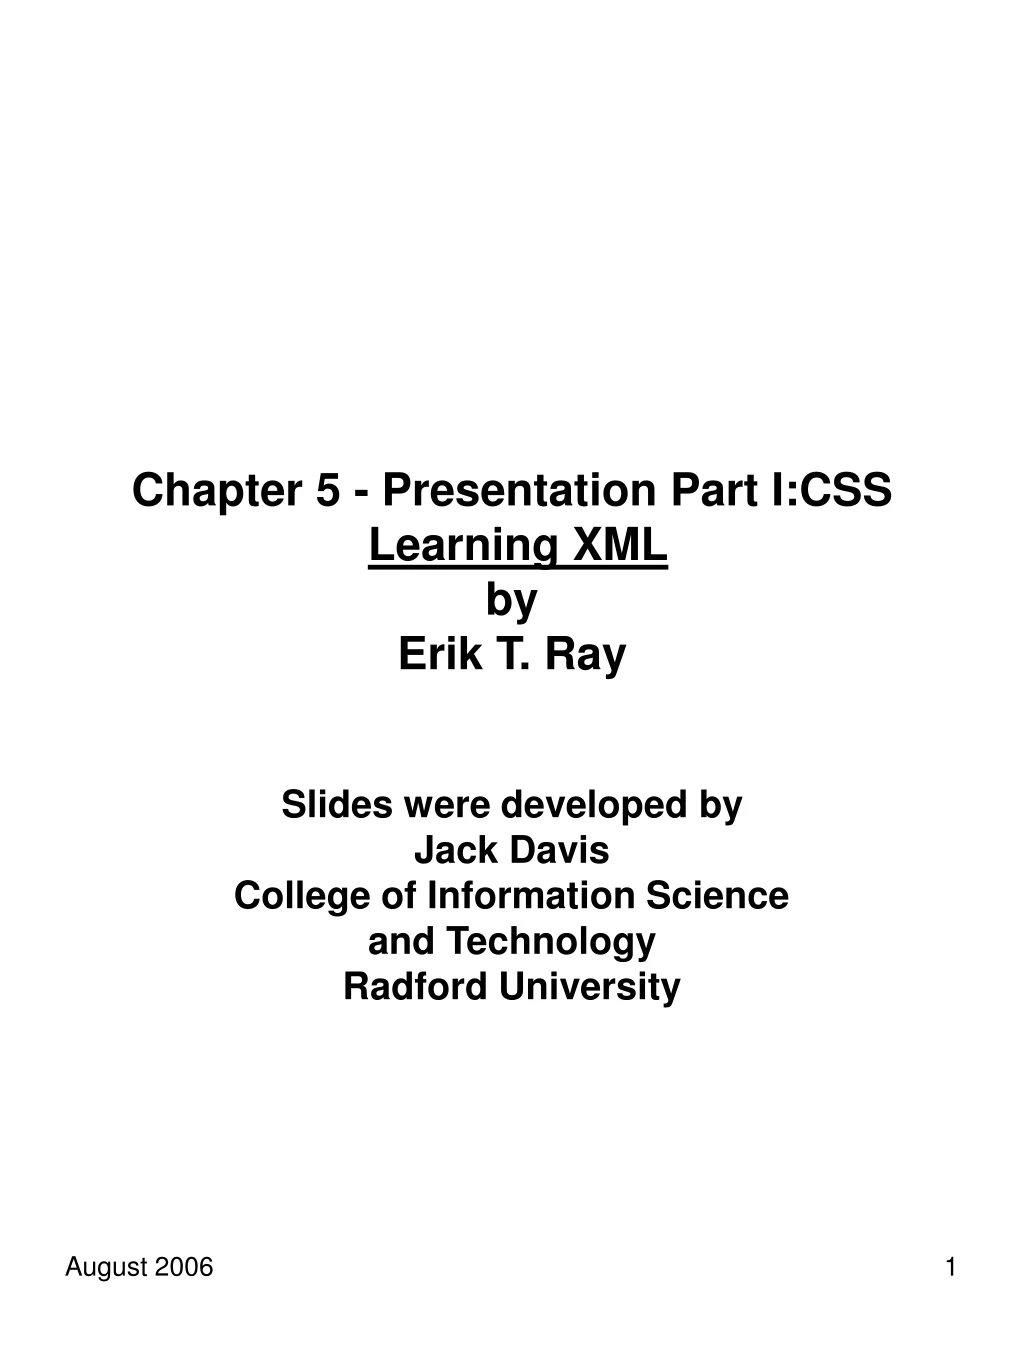 chapter 5 presentation part i css learning xml by erik t ray